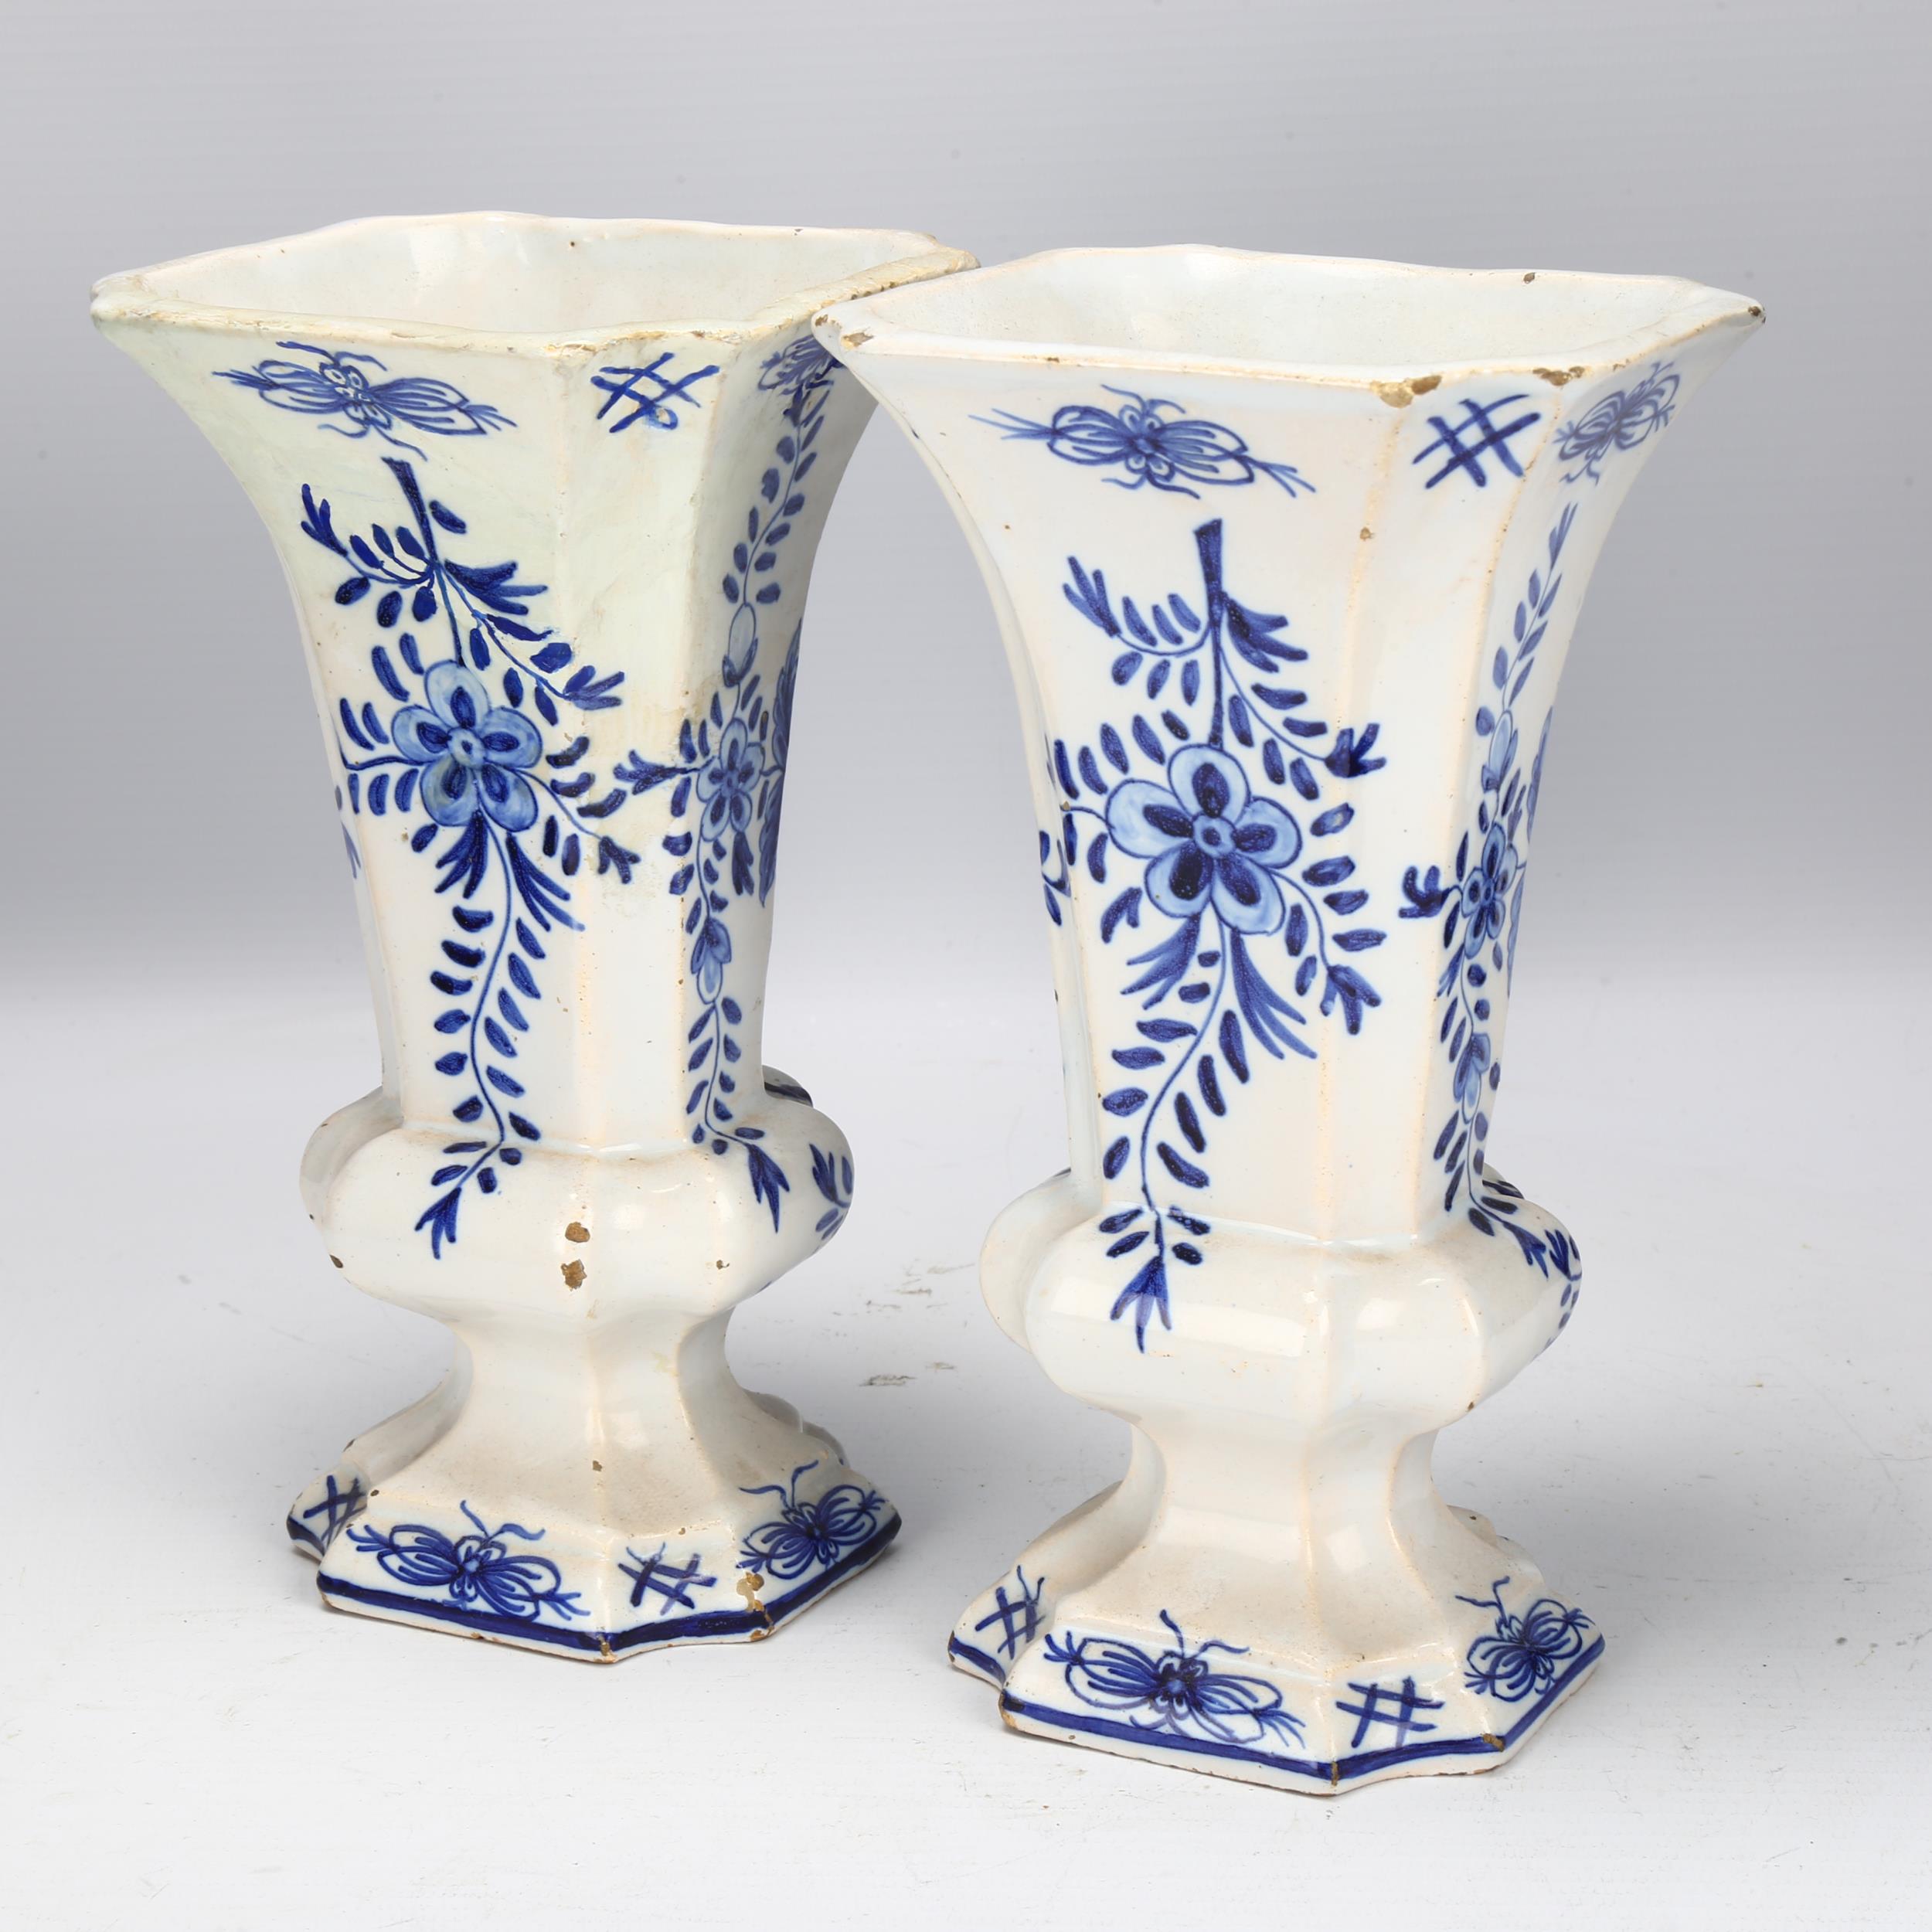 Pair of Delft blue and white pottery square-section flared vases, height 19cm 1 vase has restoration - Image 2 of 3